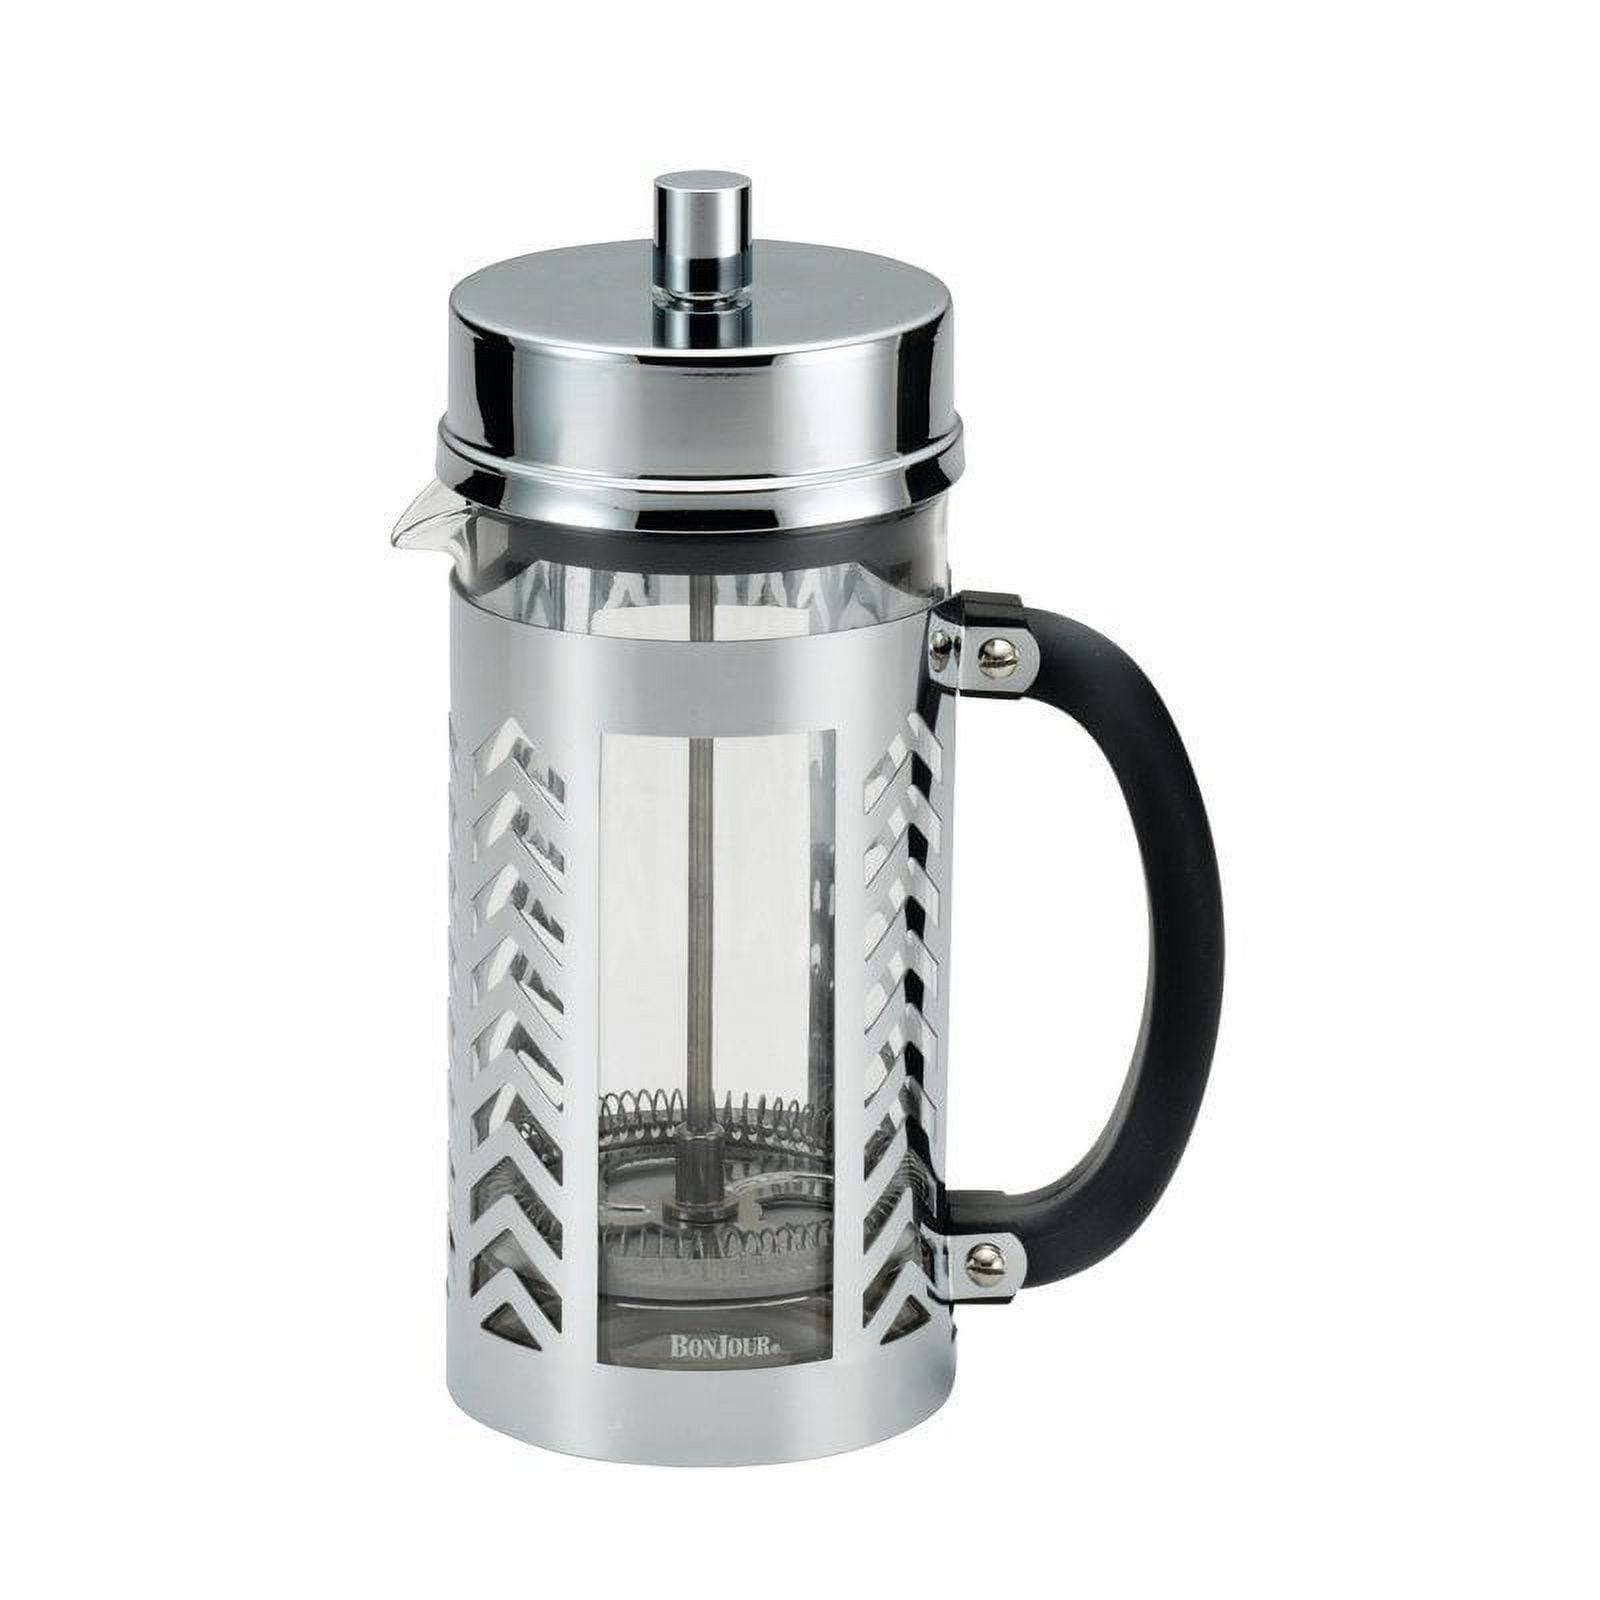 BonJour Coffee Glass and Stainless Steel French Press, 33.8-Ounce, Chevron  